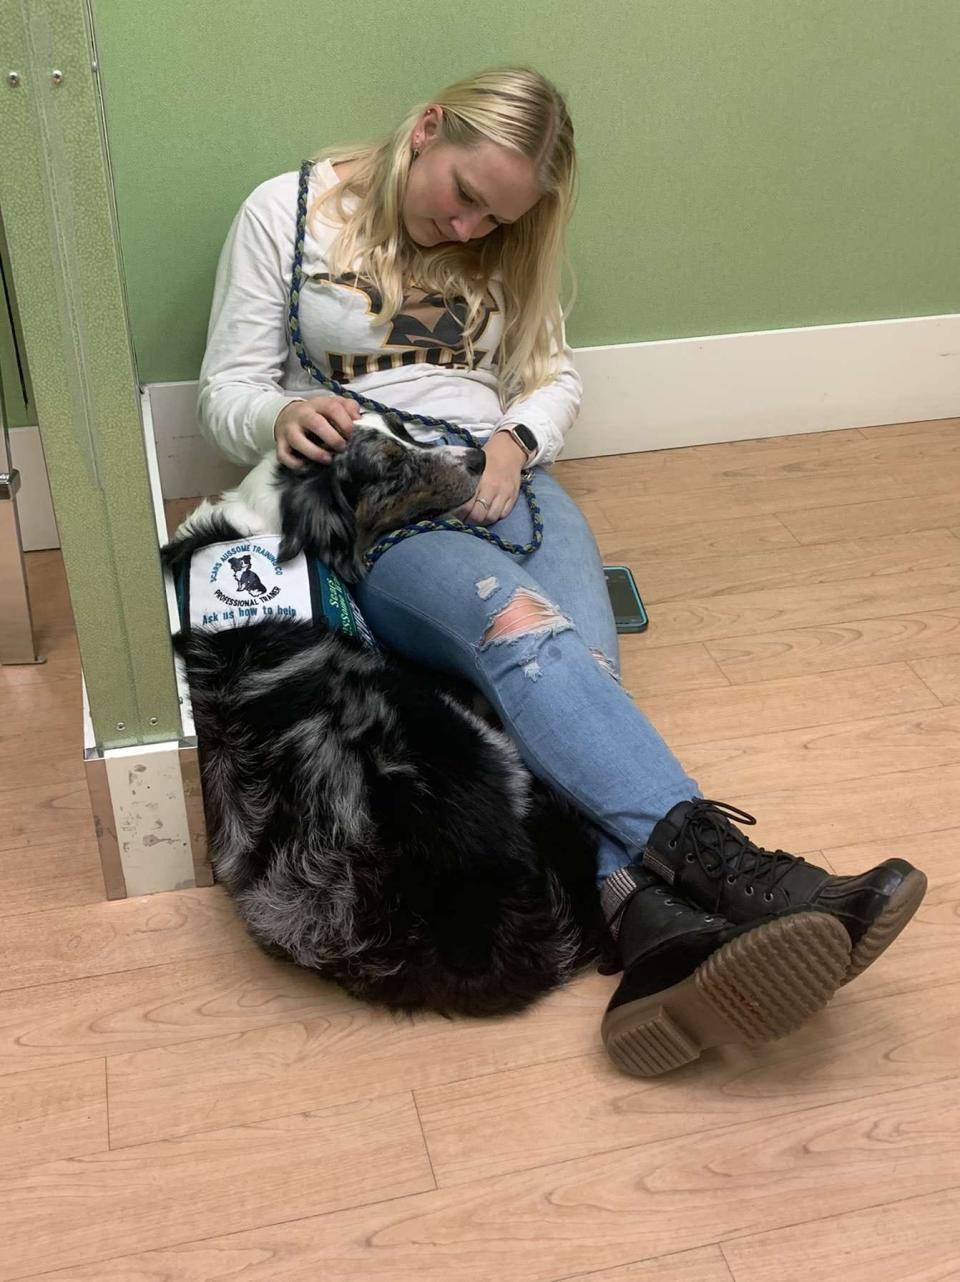 Carissa Tank, owner of Scar's AUSSome Training, takes her service dog Scar into public spaces like stores where his support is necessary. He is trained in mobility tasks and preventing and alerting panic attacks.